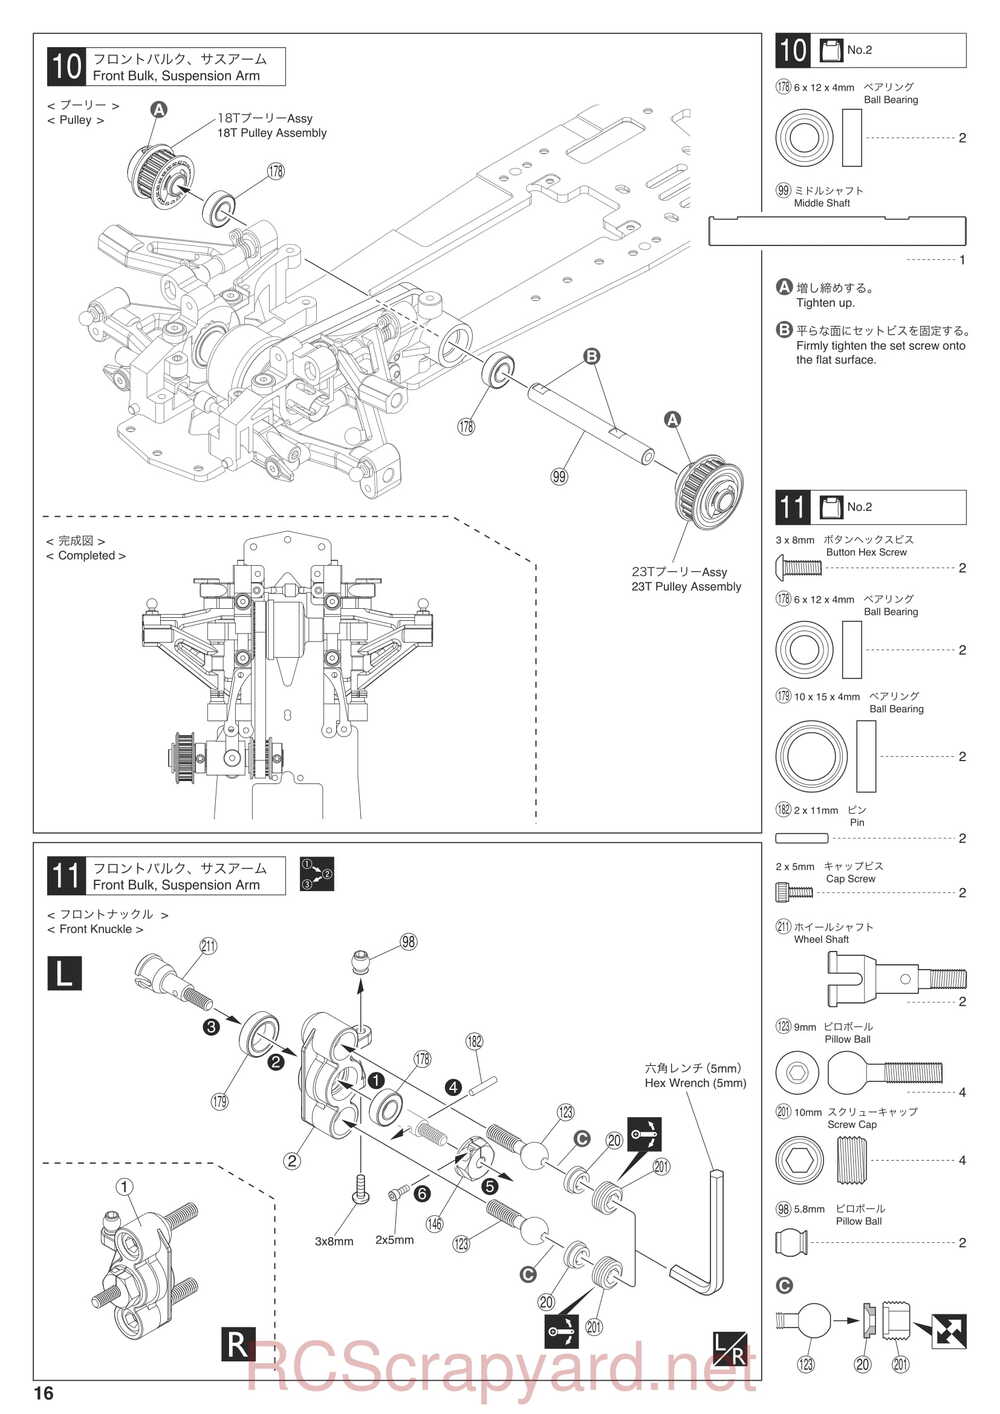 Kyosho - 31265 - V-ONE-R4 - Manual - Page 16